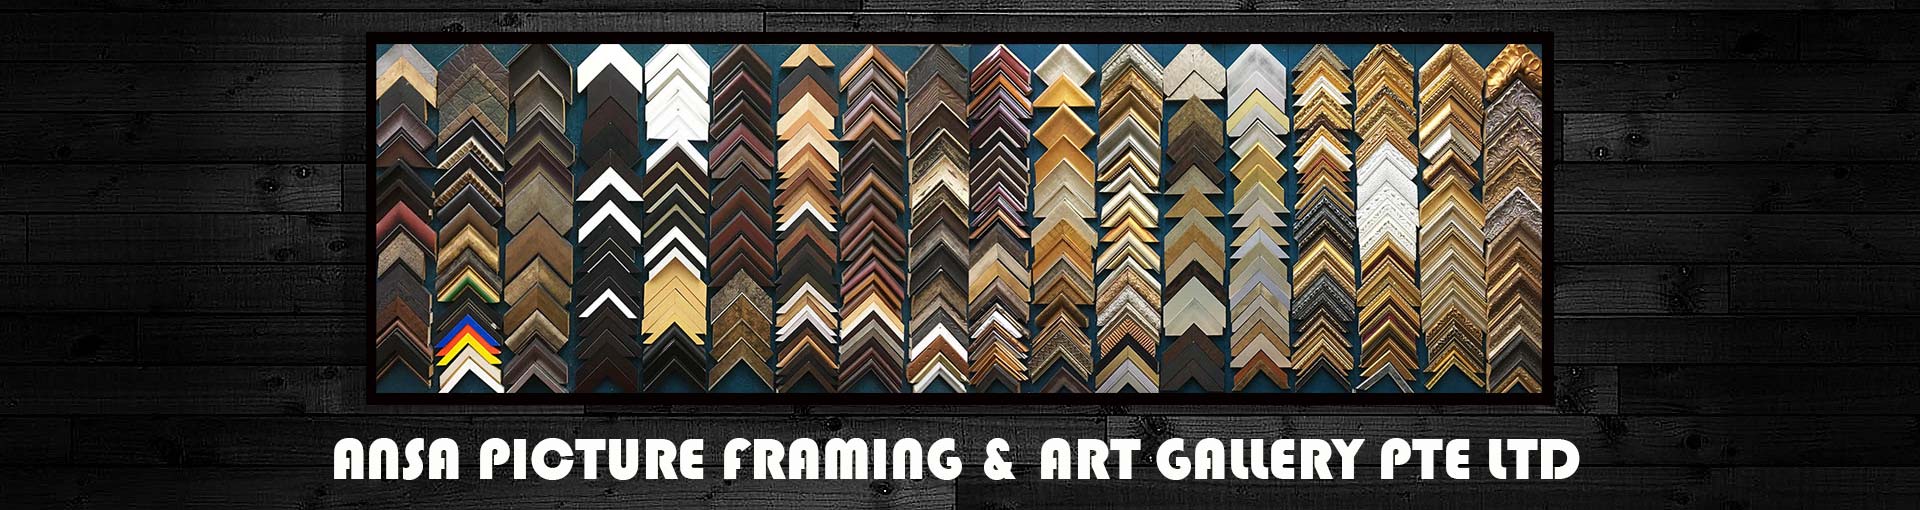 picture-framing-samples